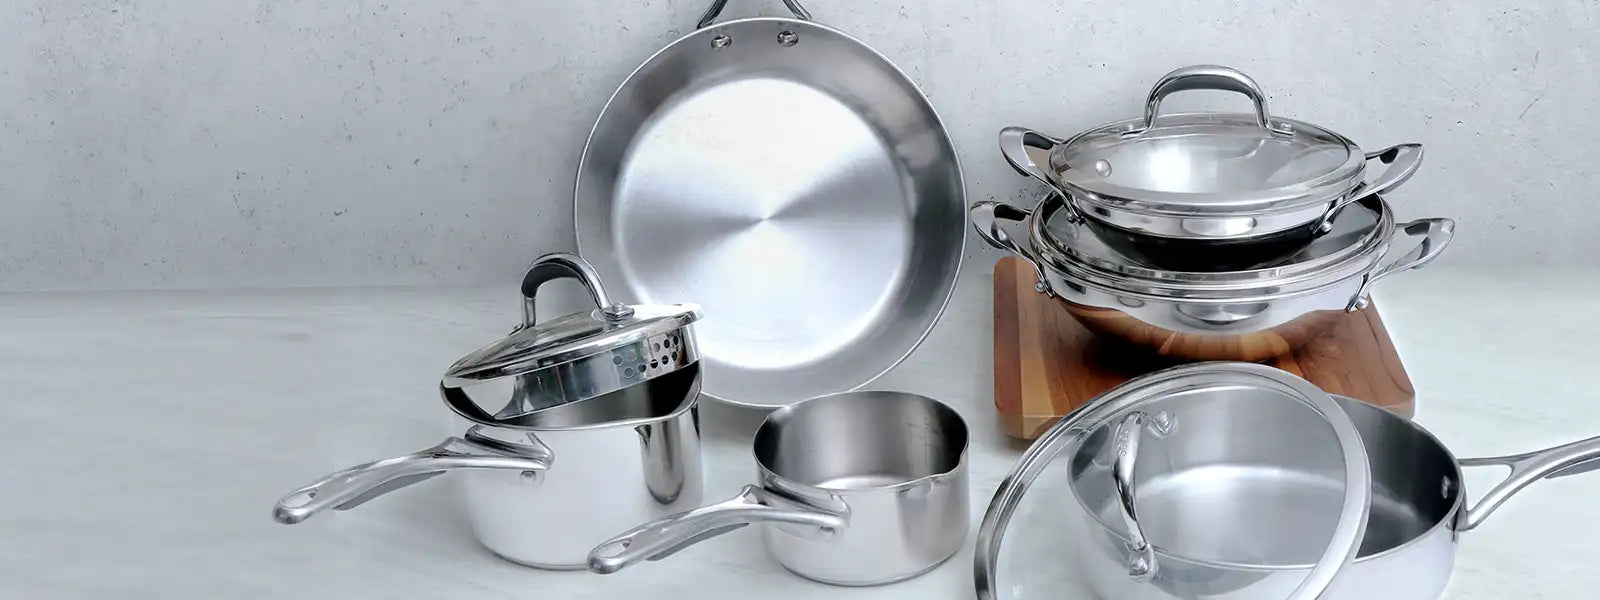 Meyer Select Entire Range  Best Nickel-Free Stainless Steel Cookware 